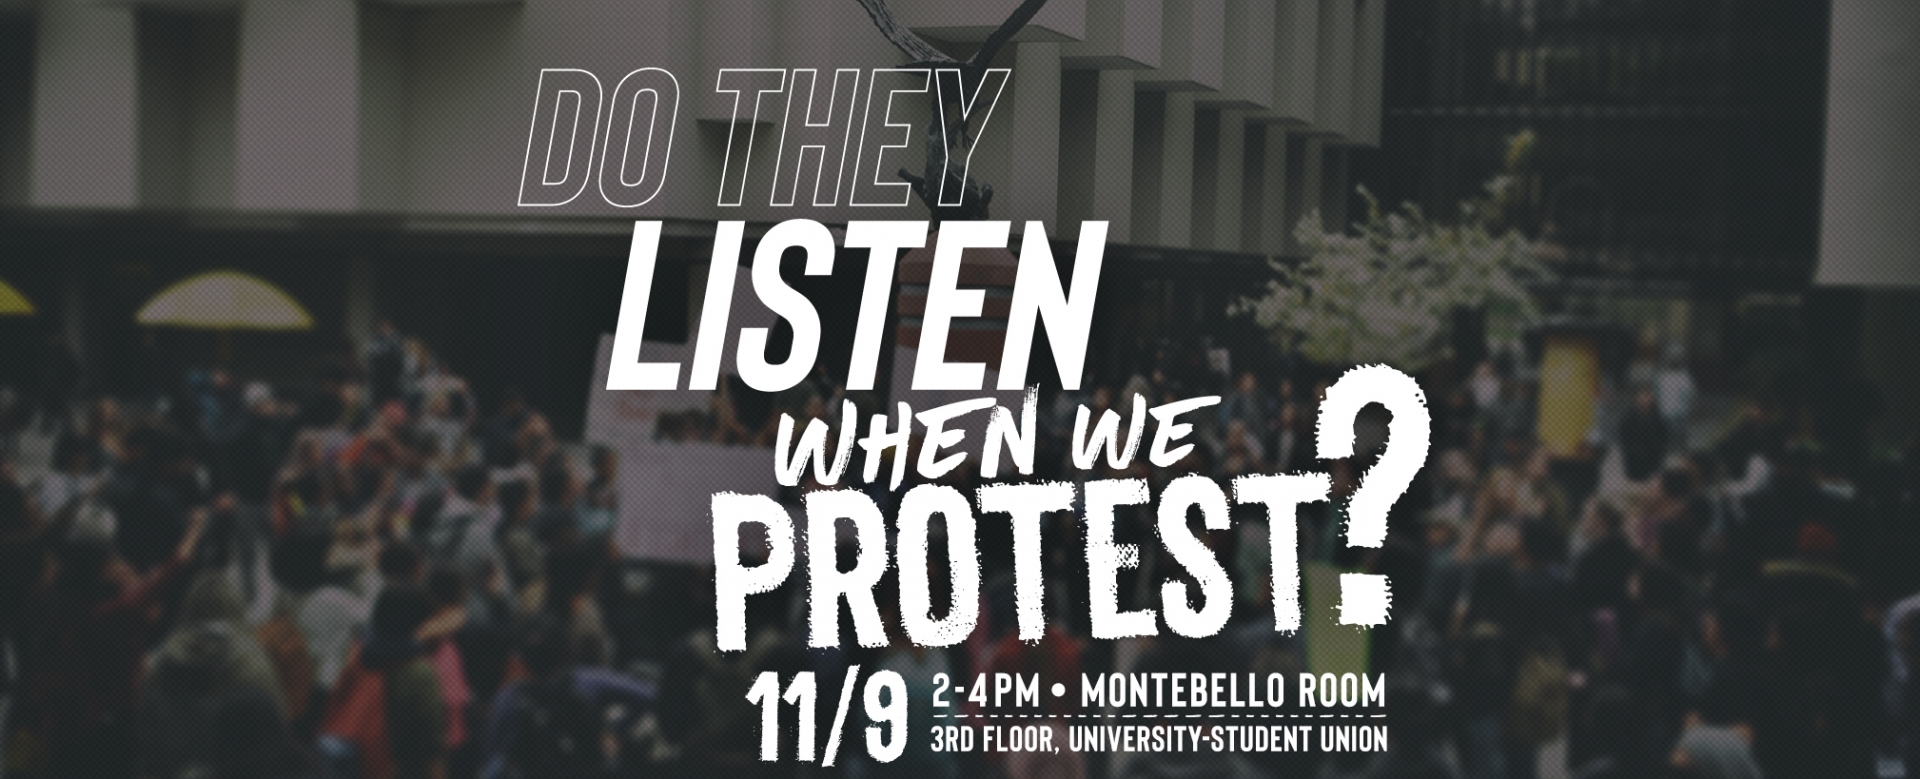 TOWN HALL: DO THEY ONLY LISTEN WHEN WE PROTEST?